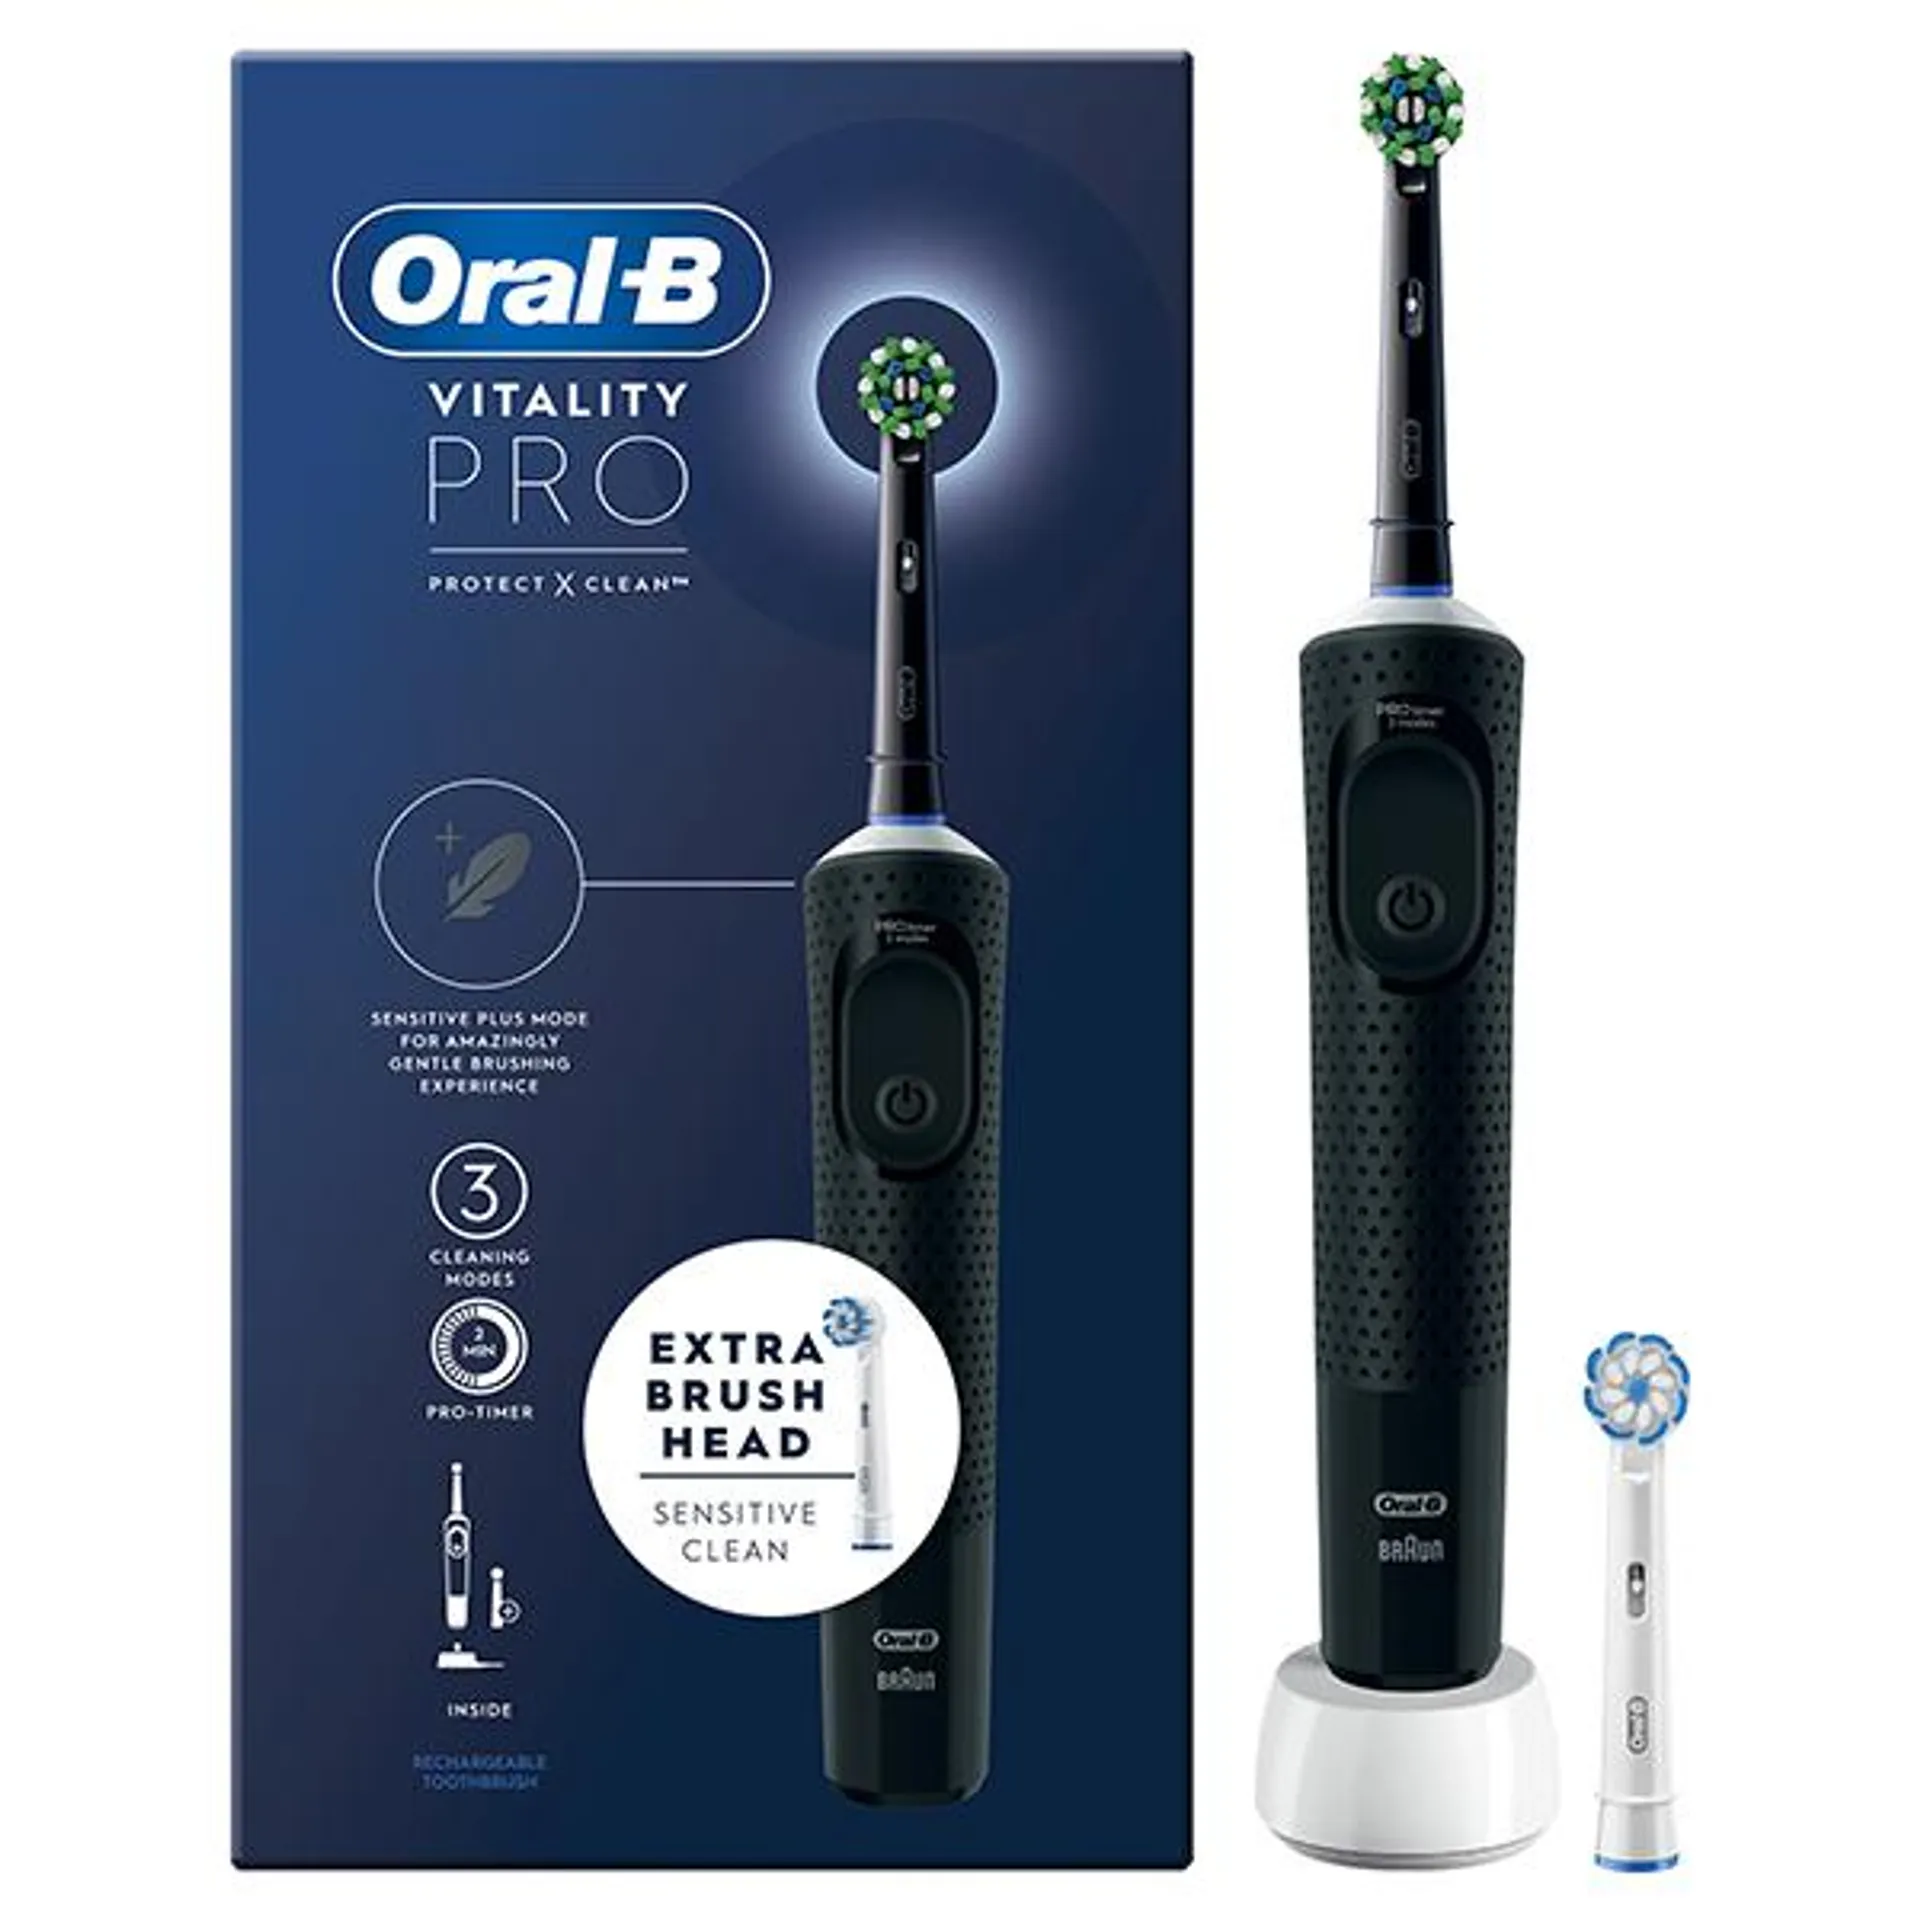 Oral-B Vitality PRO Black Electric Rechargeable Toothbrush